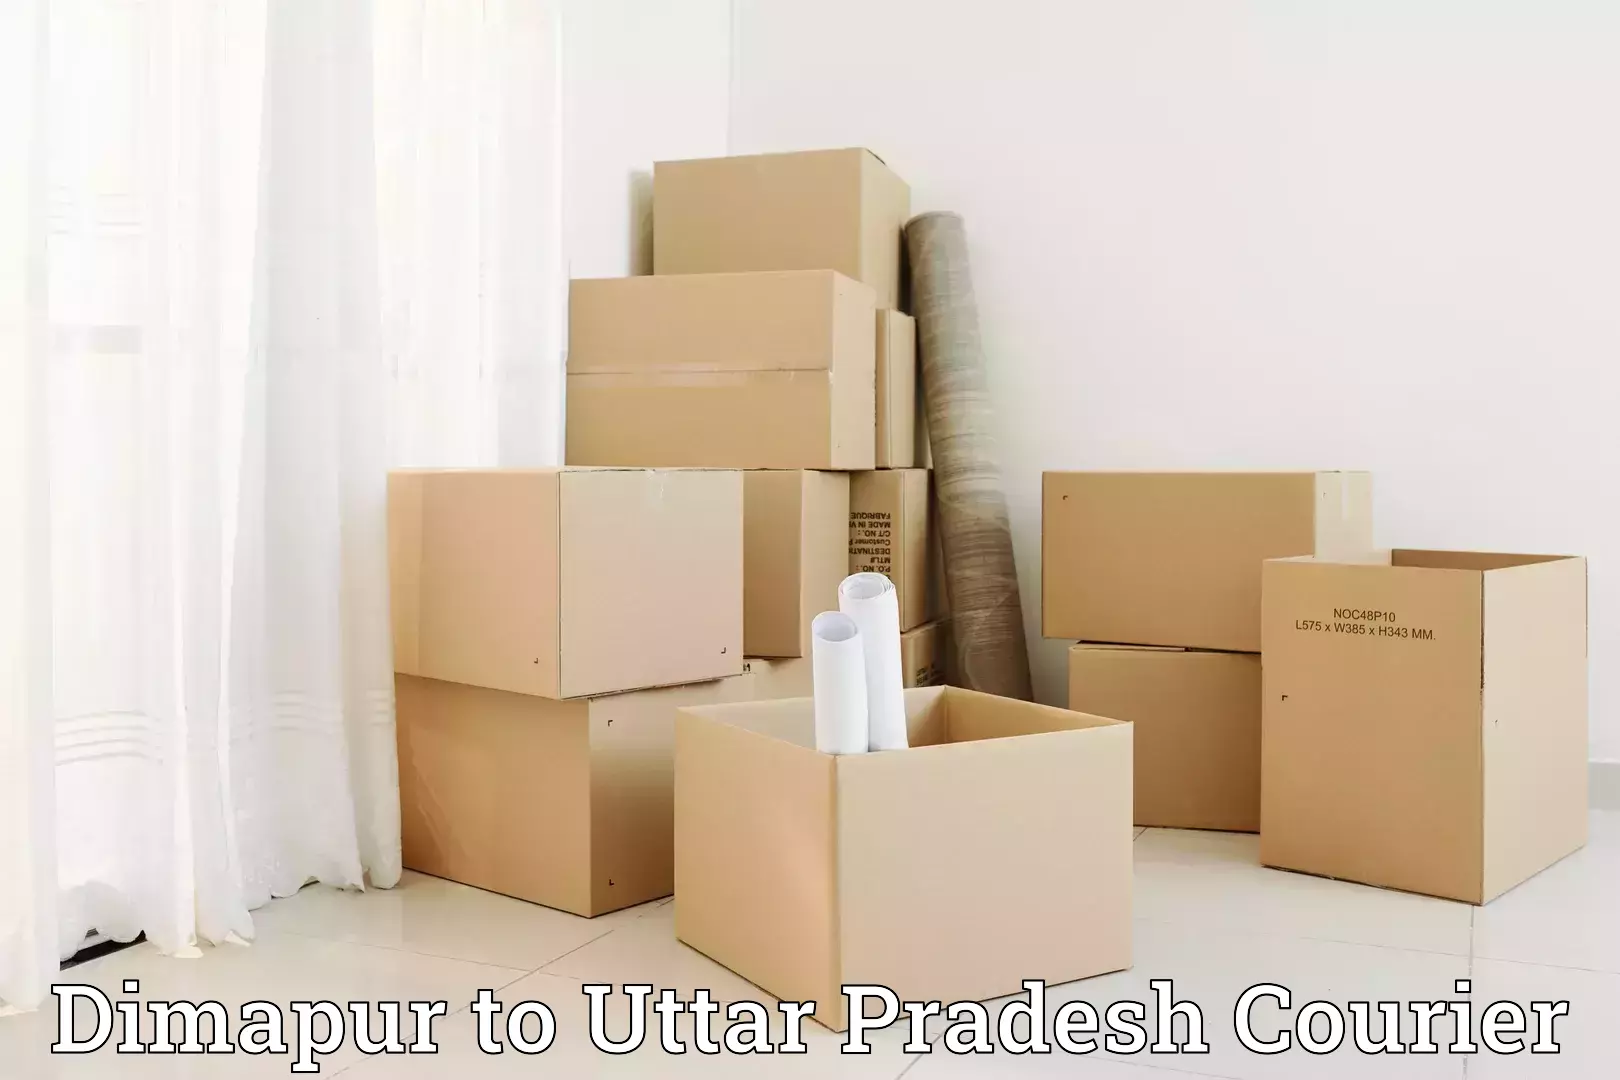 Household goods transport service Dimapur to Ghaziabad